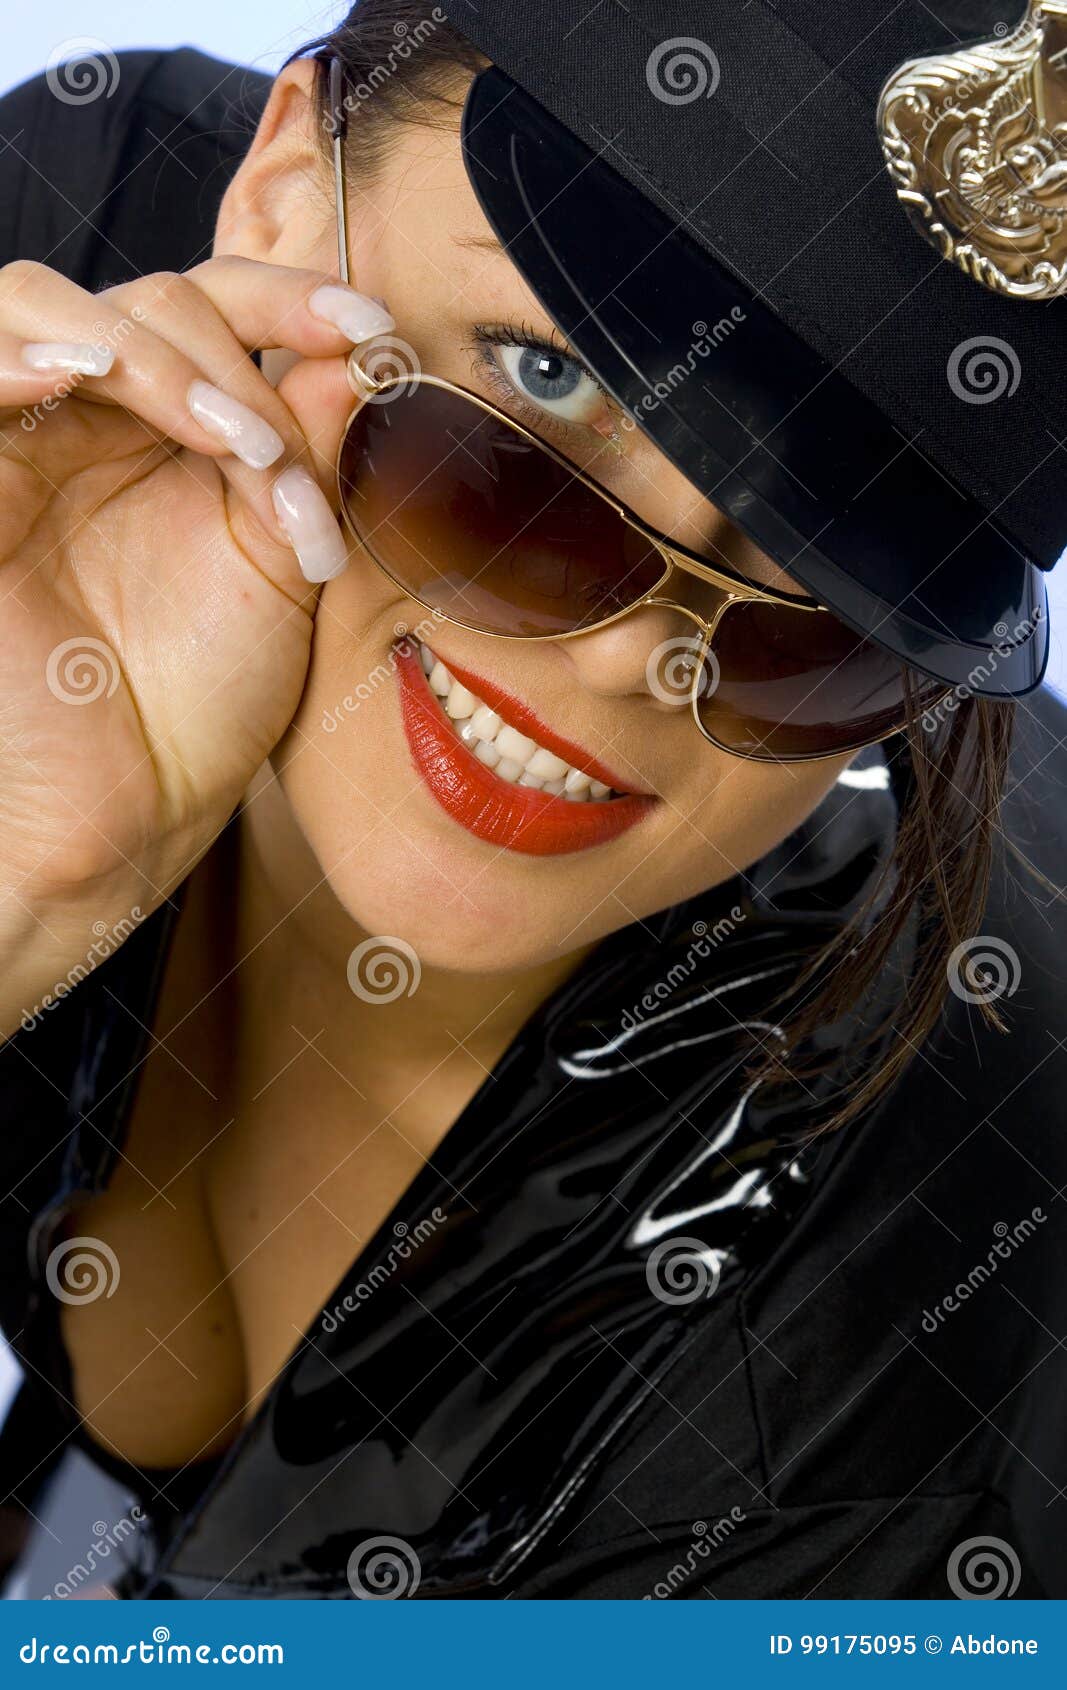 Funny Woman Wearing a Police Costume Stock Image - Image of arms, woman:  99175095